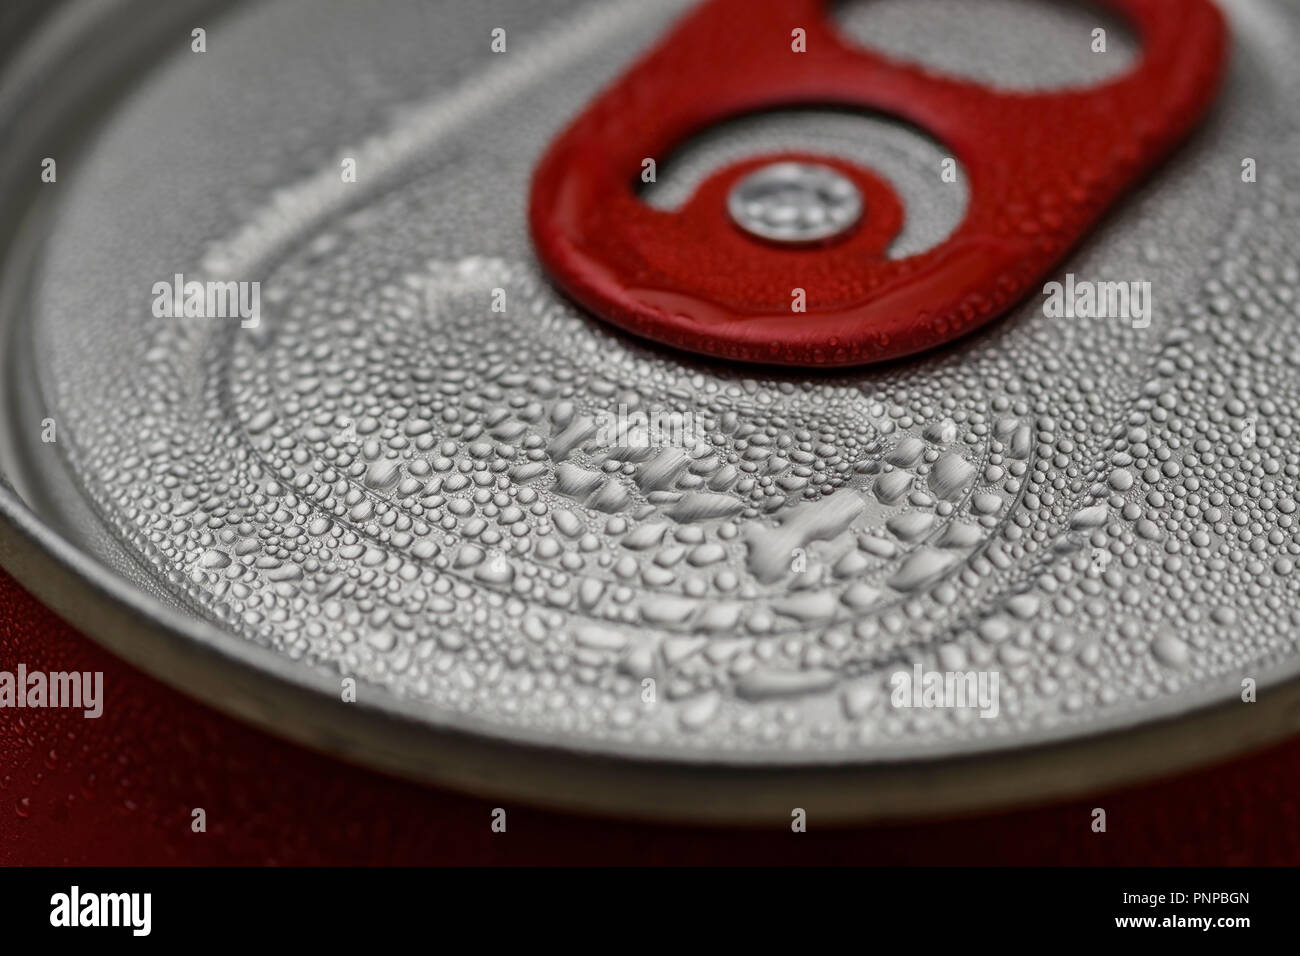 Red can opening tab close-up with condensation droplets Stock Photo